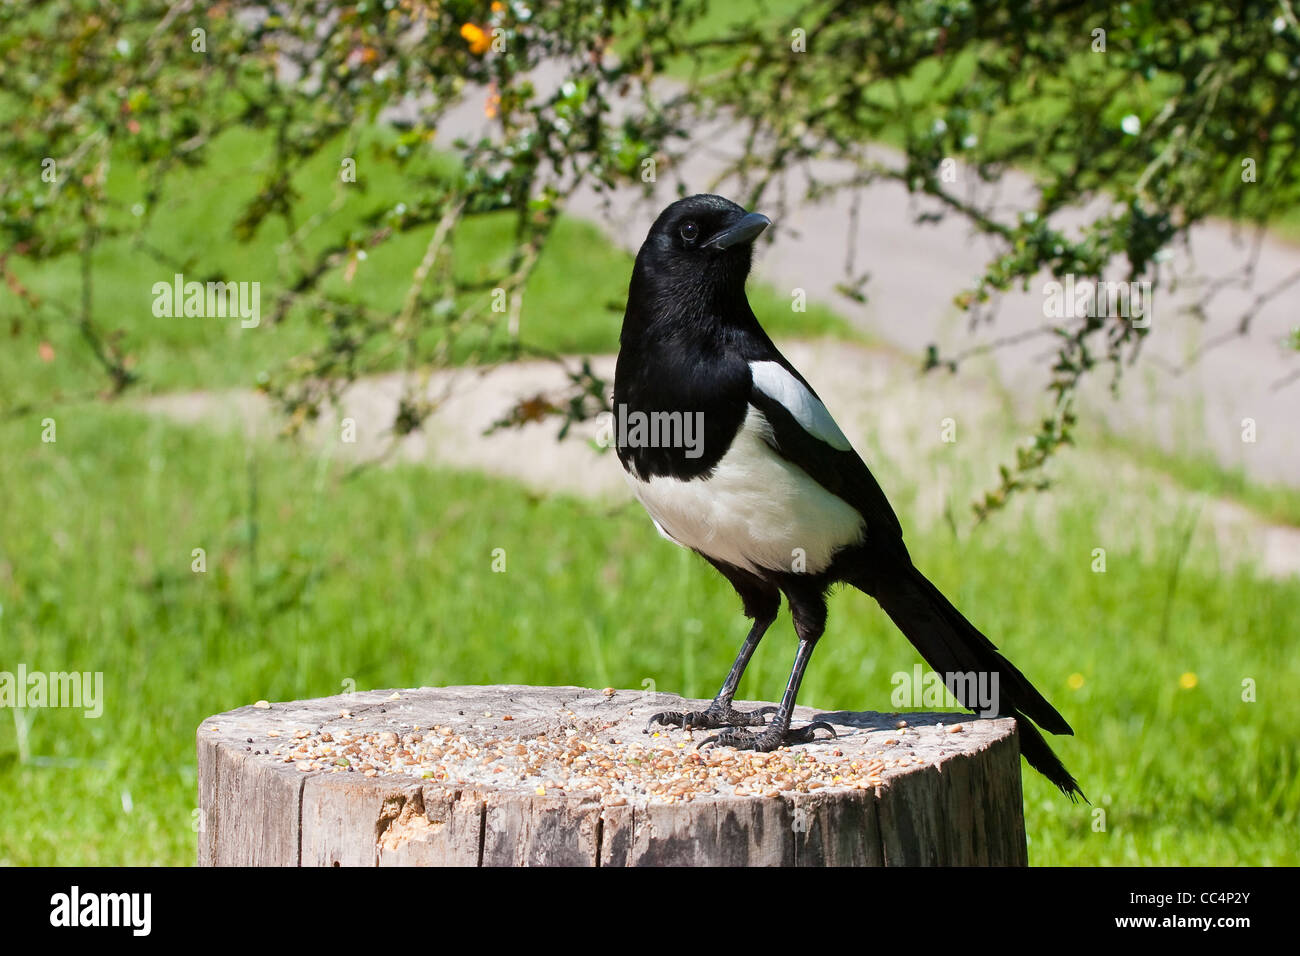 European Magpie Perched on Log with Food Stock Photo